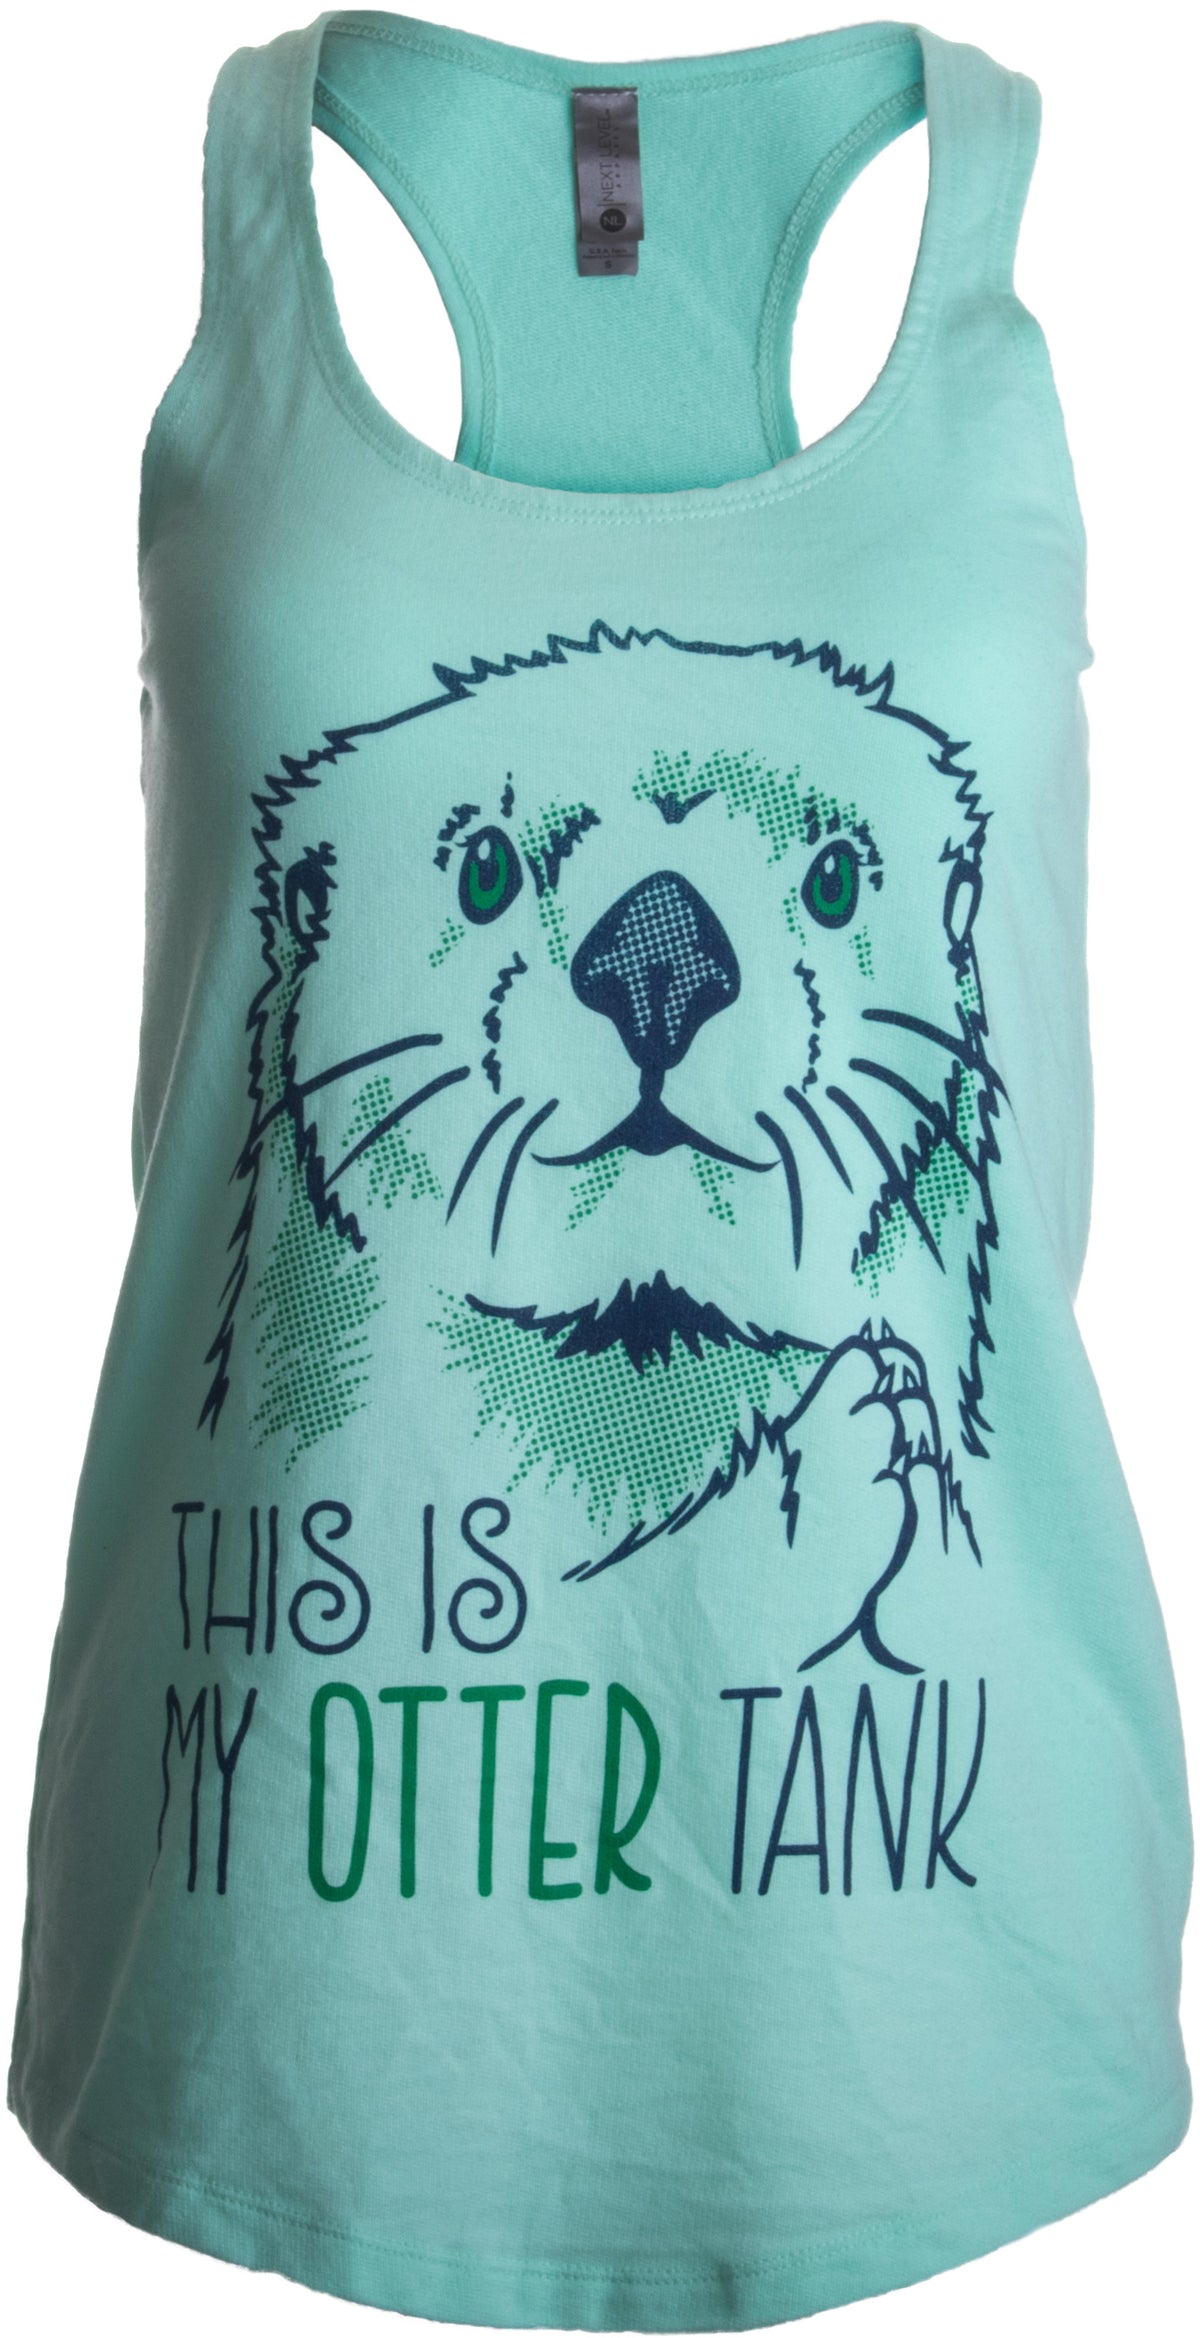 This is my Otter Tank | Cute Otter Lover Top, Women's Racerback Workout Tank